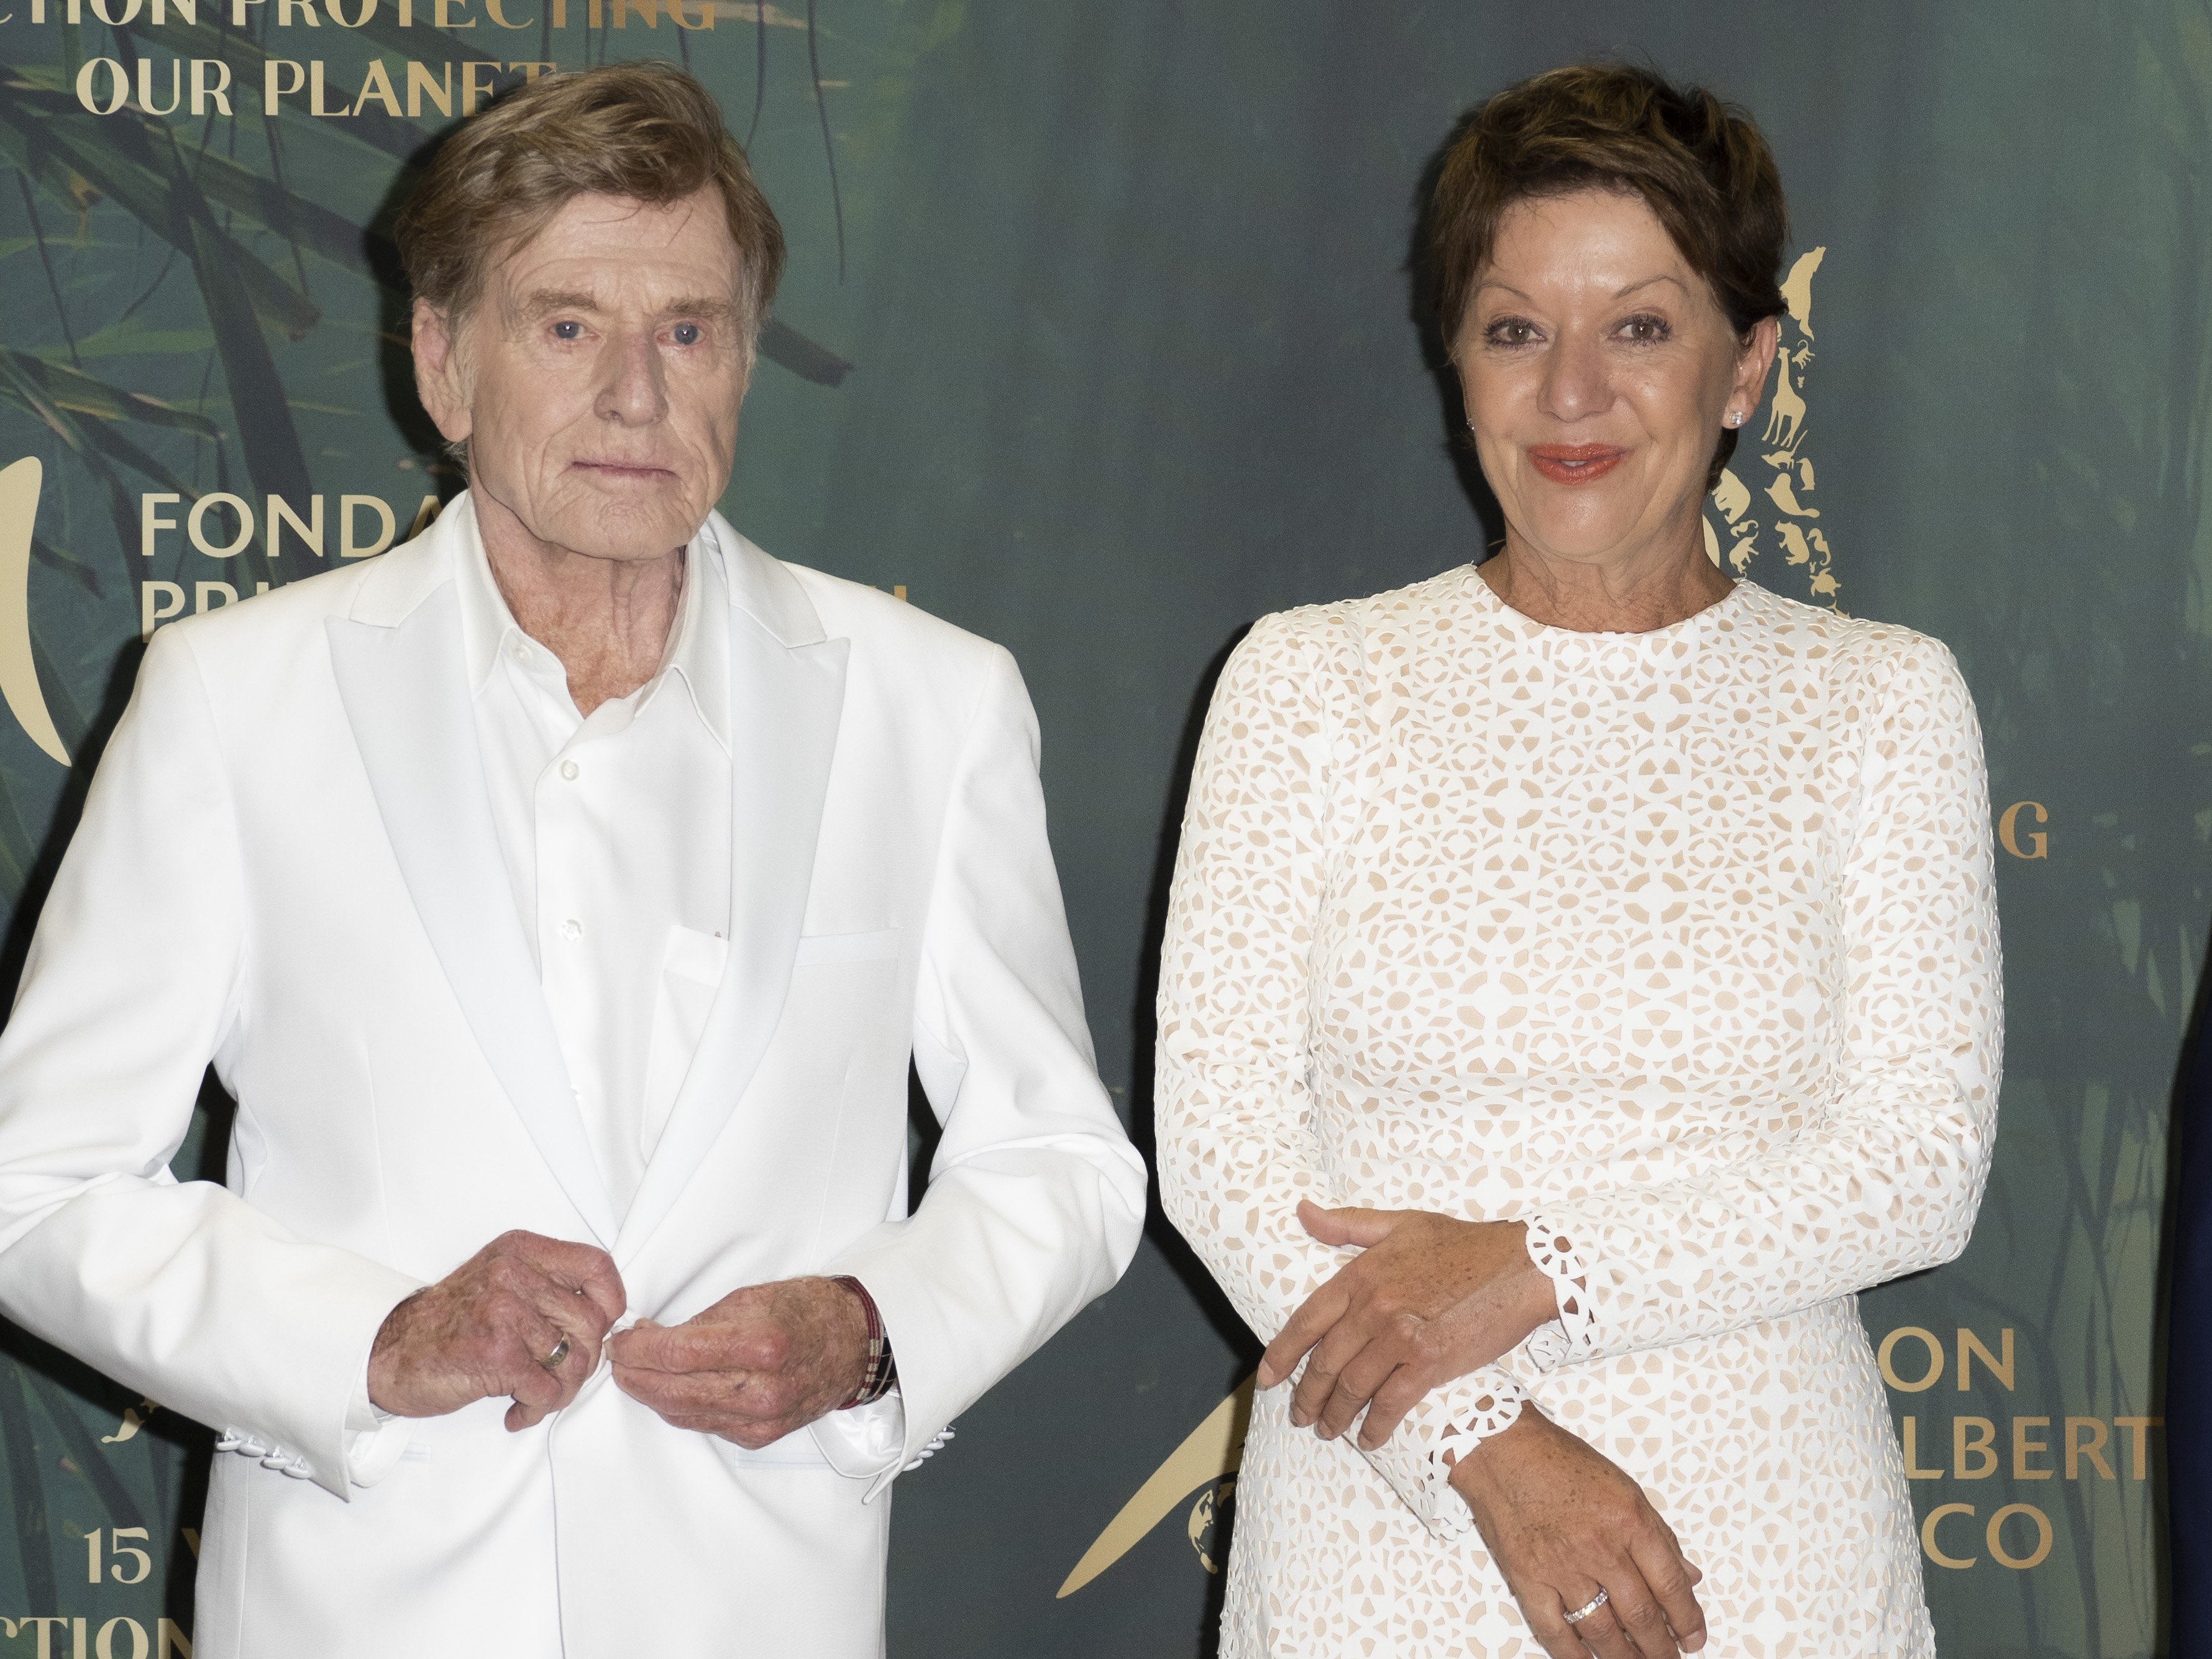 Robert Redford and Sibylle Szaggars at The Prince Albert II of Monaco Foundation's 2021 award ceremony on October 29, 2021 | Source: Getty Images